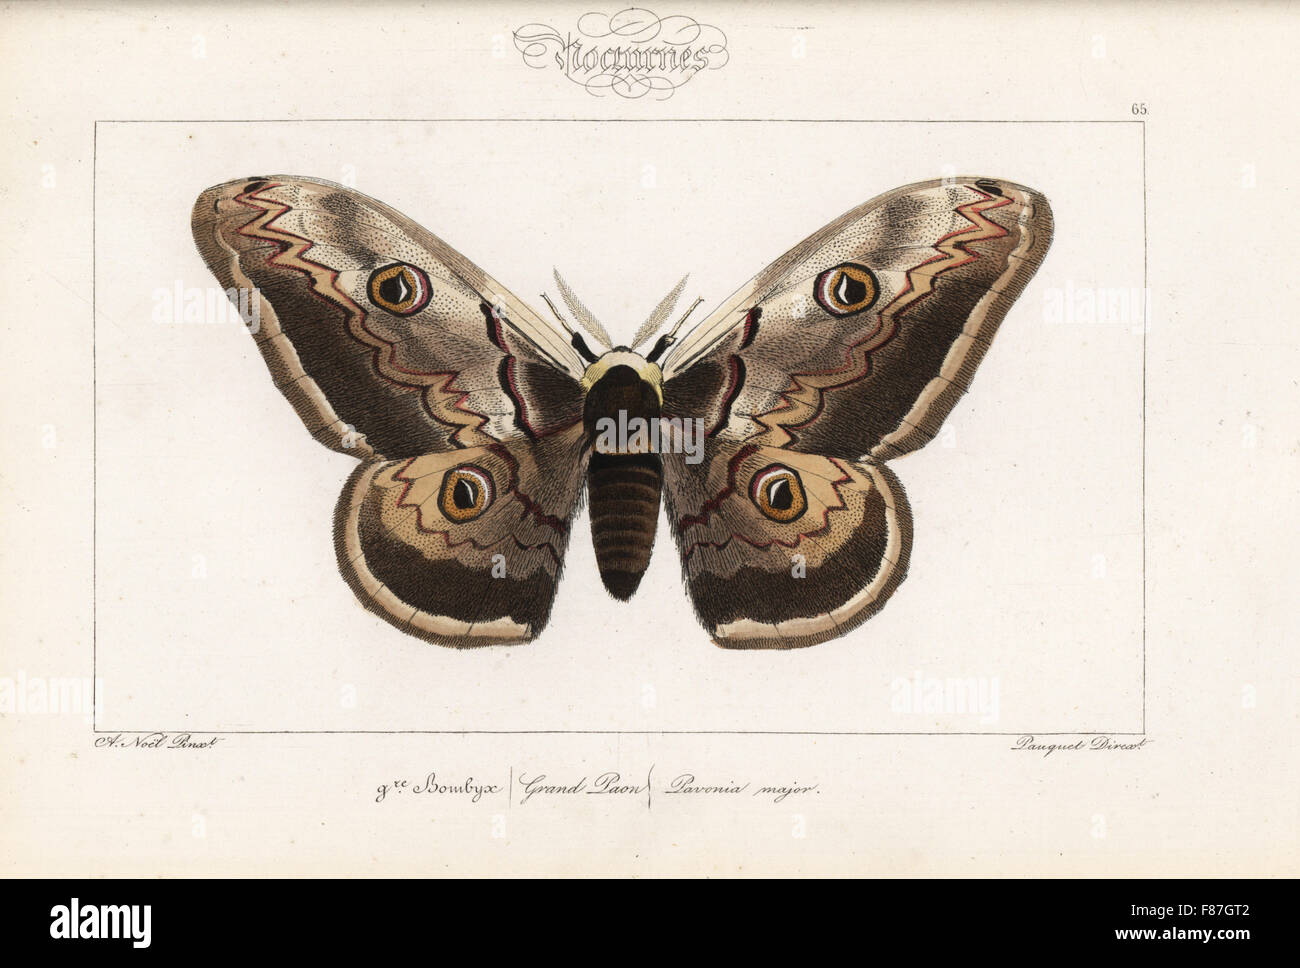 Giant emperor moth, Saturnia pyri (Pavonia major). Handcoloured steel engraving by the Pauquet brothers after an illustration by Alexis  Nicolas Noel from Hippolyte Lucas' Natural History of European Butterflies, Histoire Naturelle des Lepidopteres d'Europe, 1864. Stock Photo